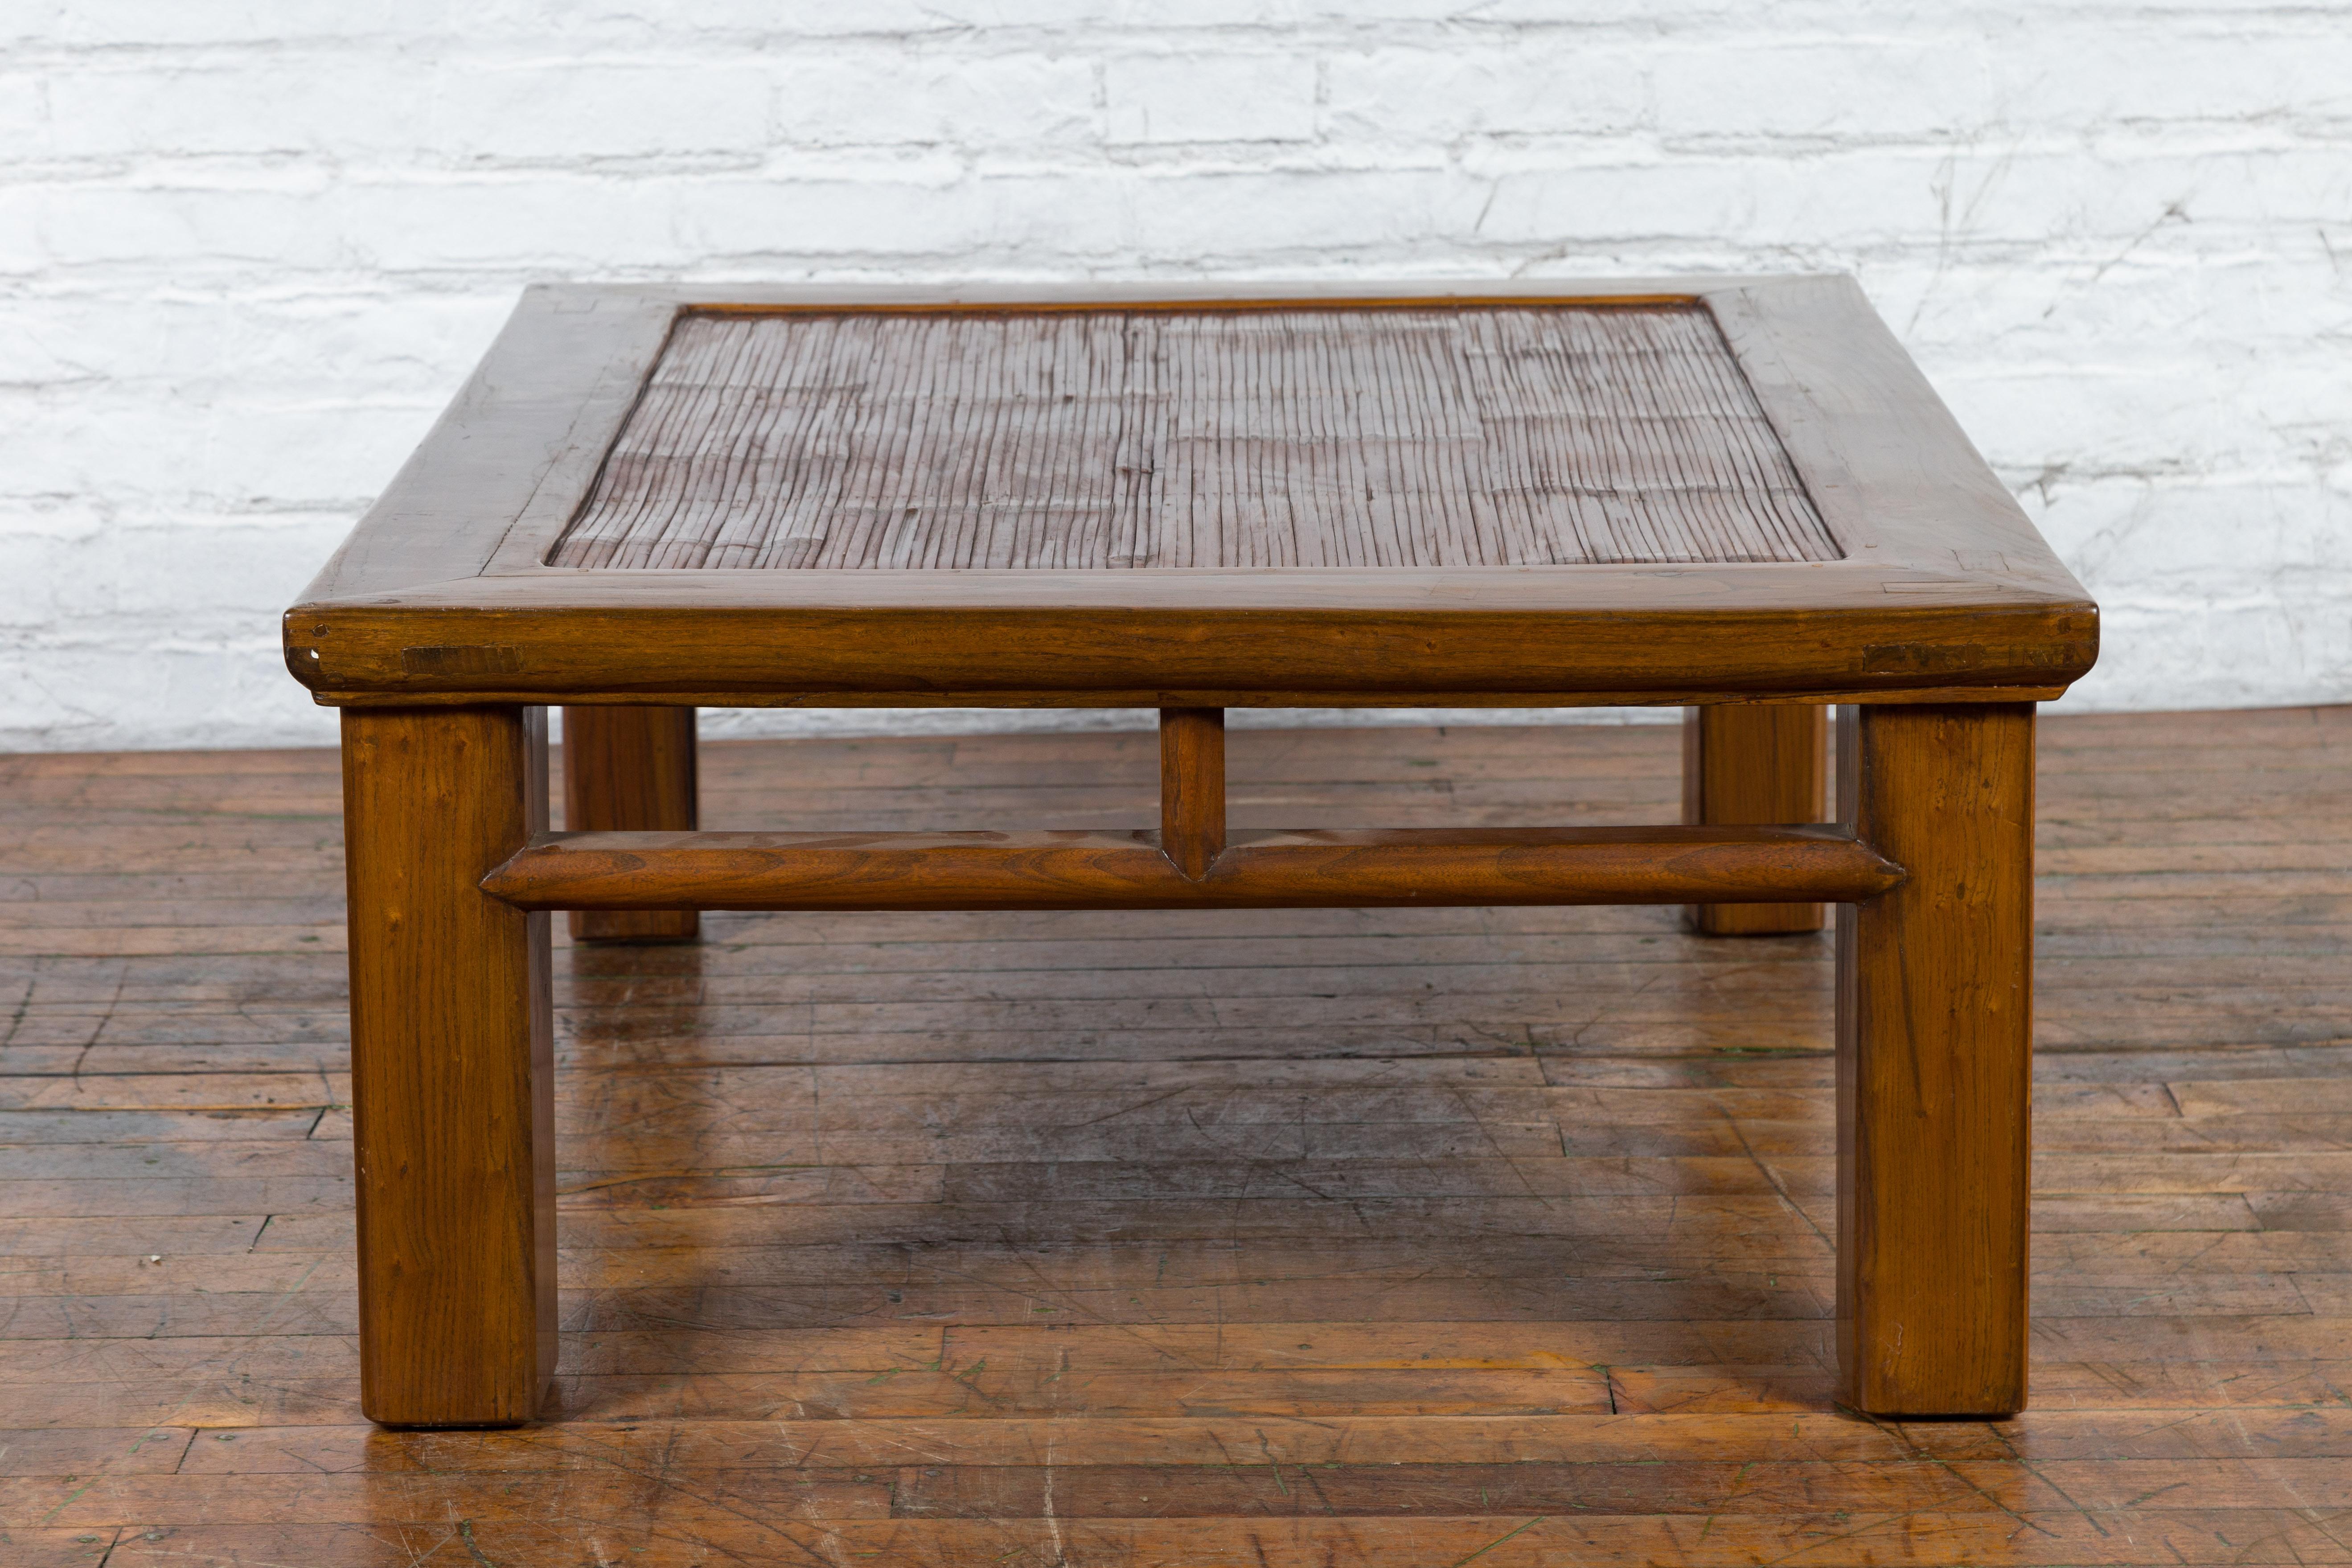 Chinese Late Qing Dynasty Wooden Coffee Table with Bamboo Top and Open Apron For Sale 9